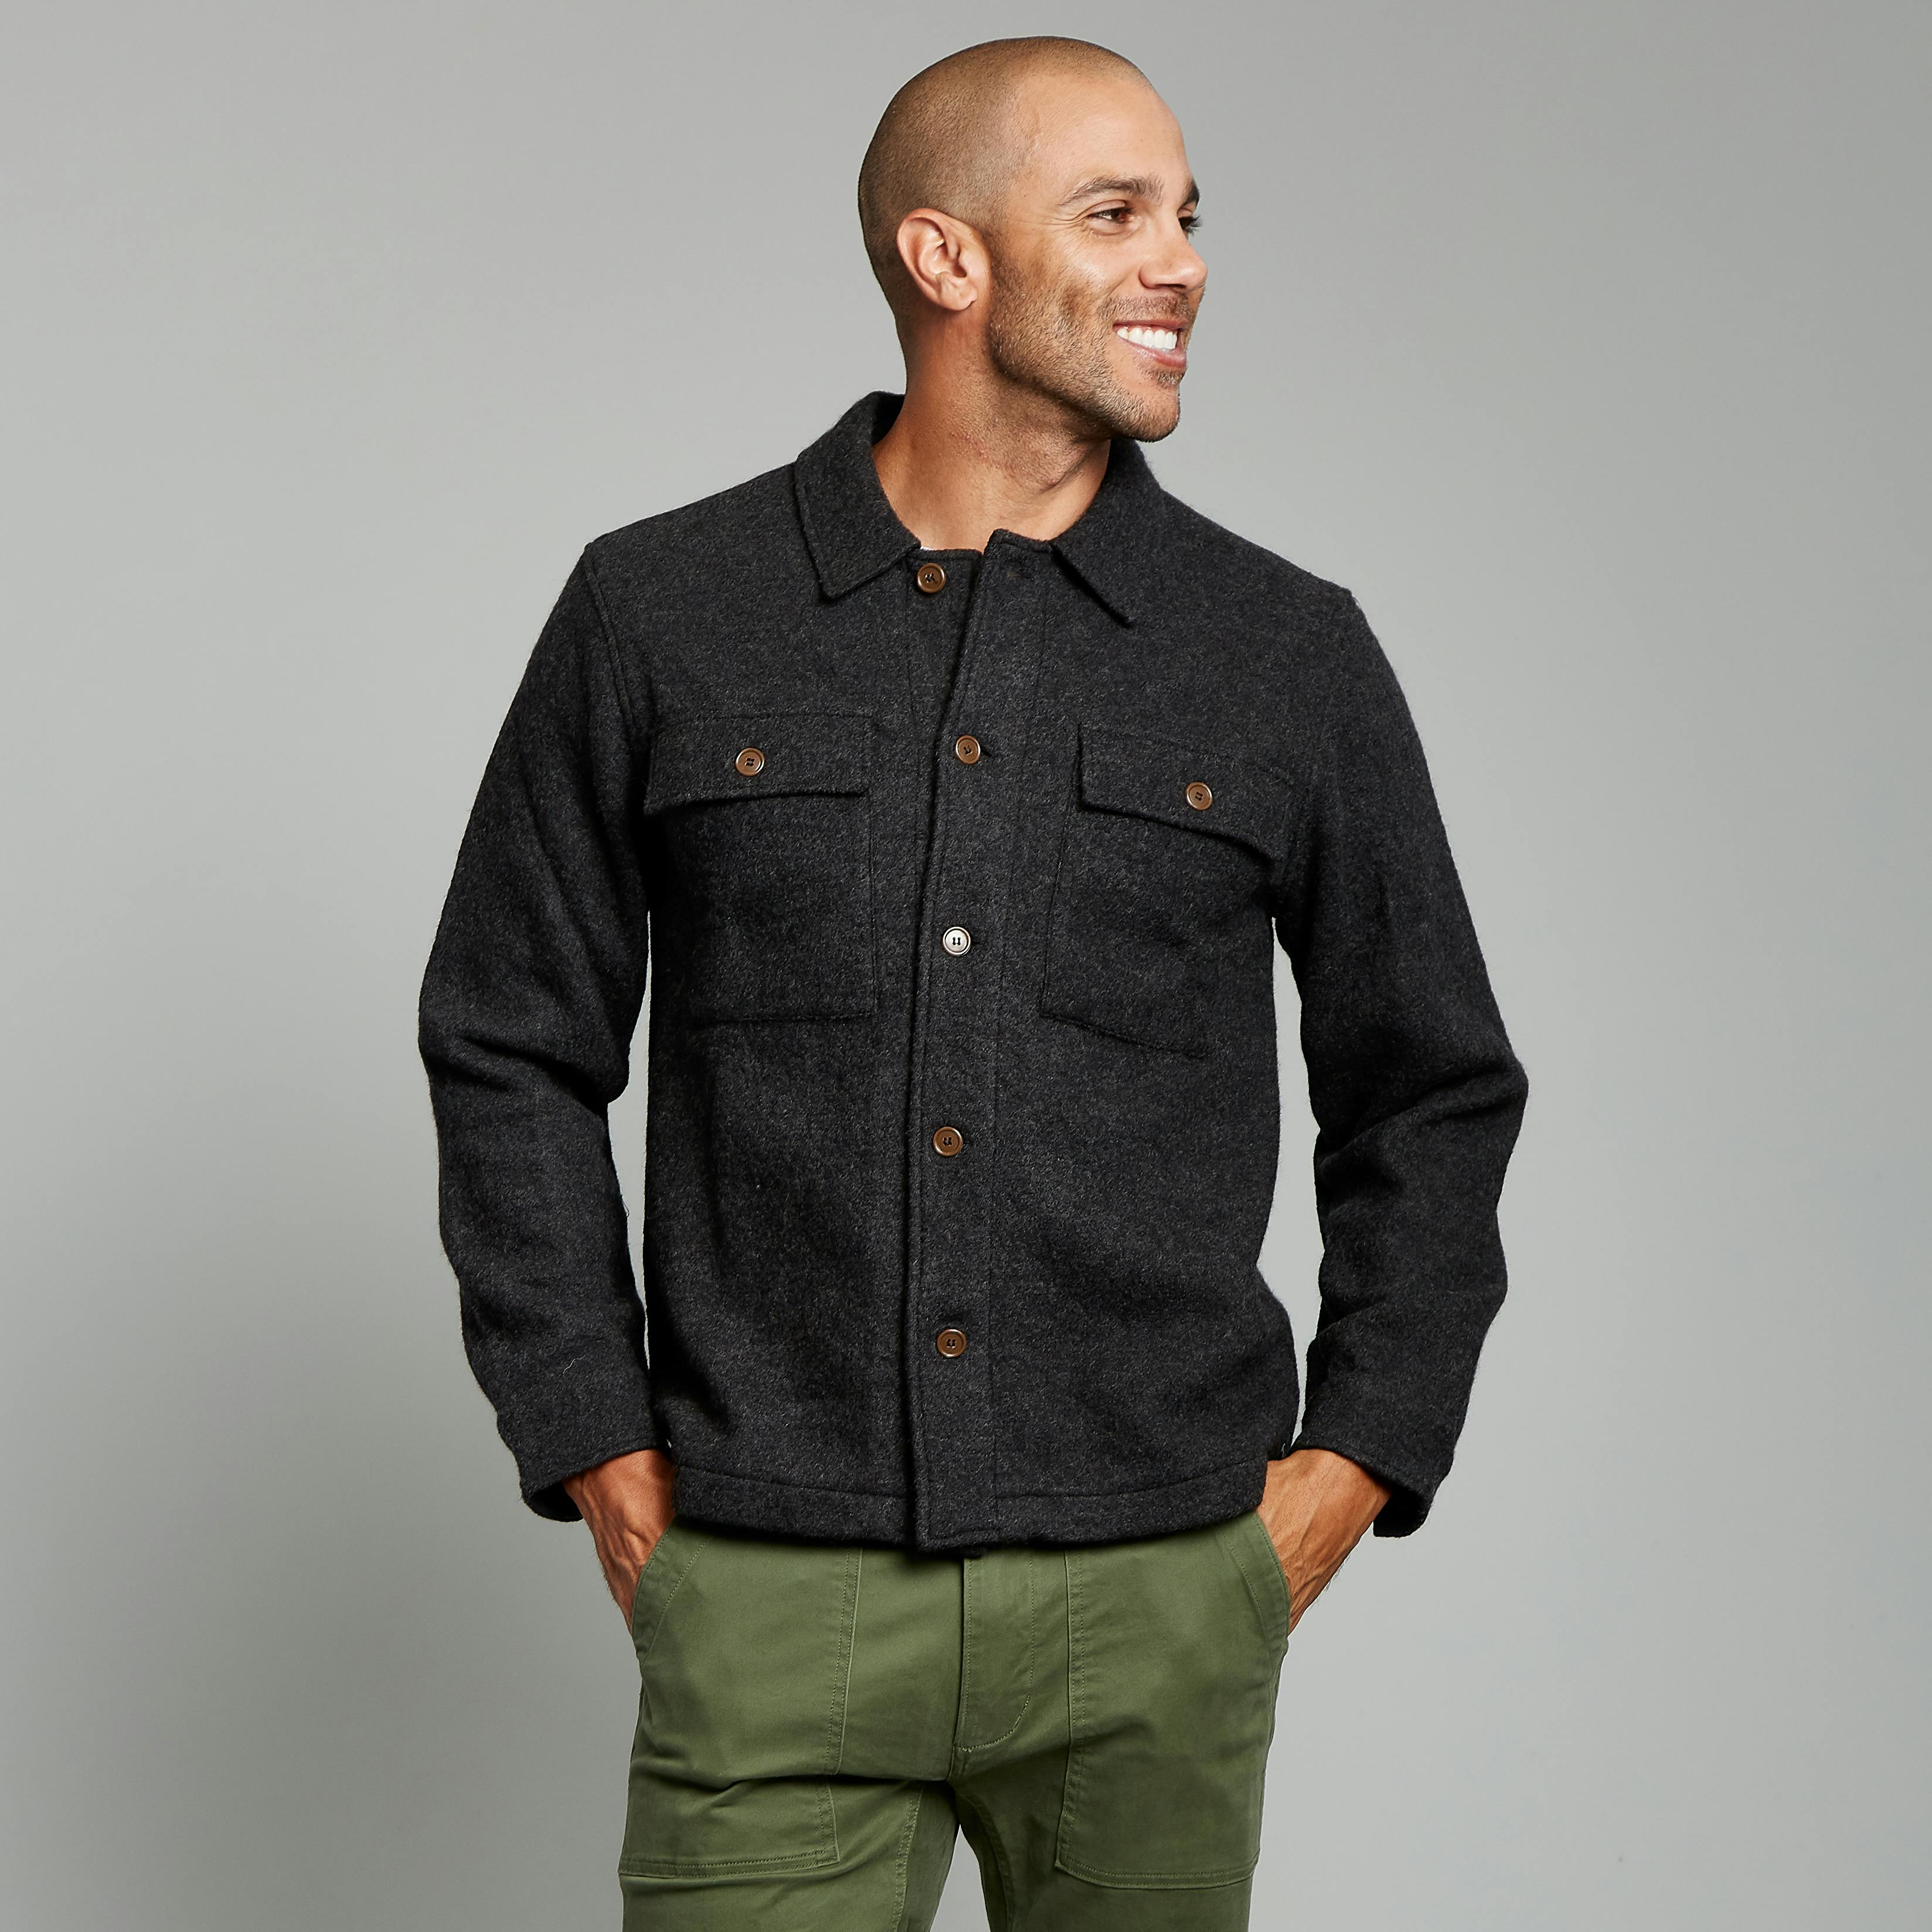 Todd Snyder Italian Boucle Knit Shirt Jacket - Charcoal